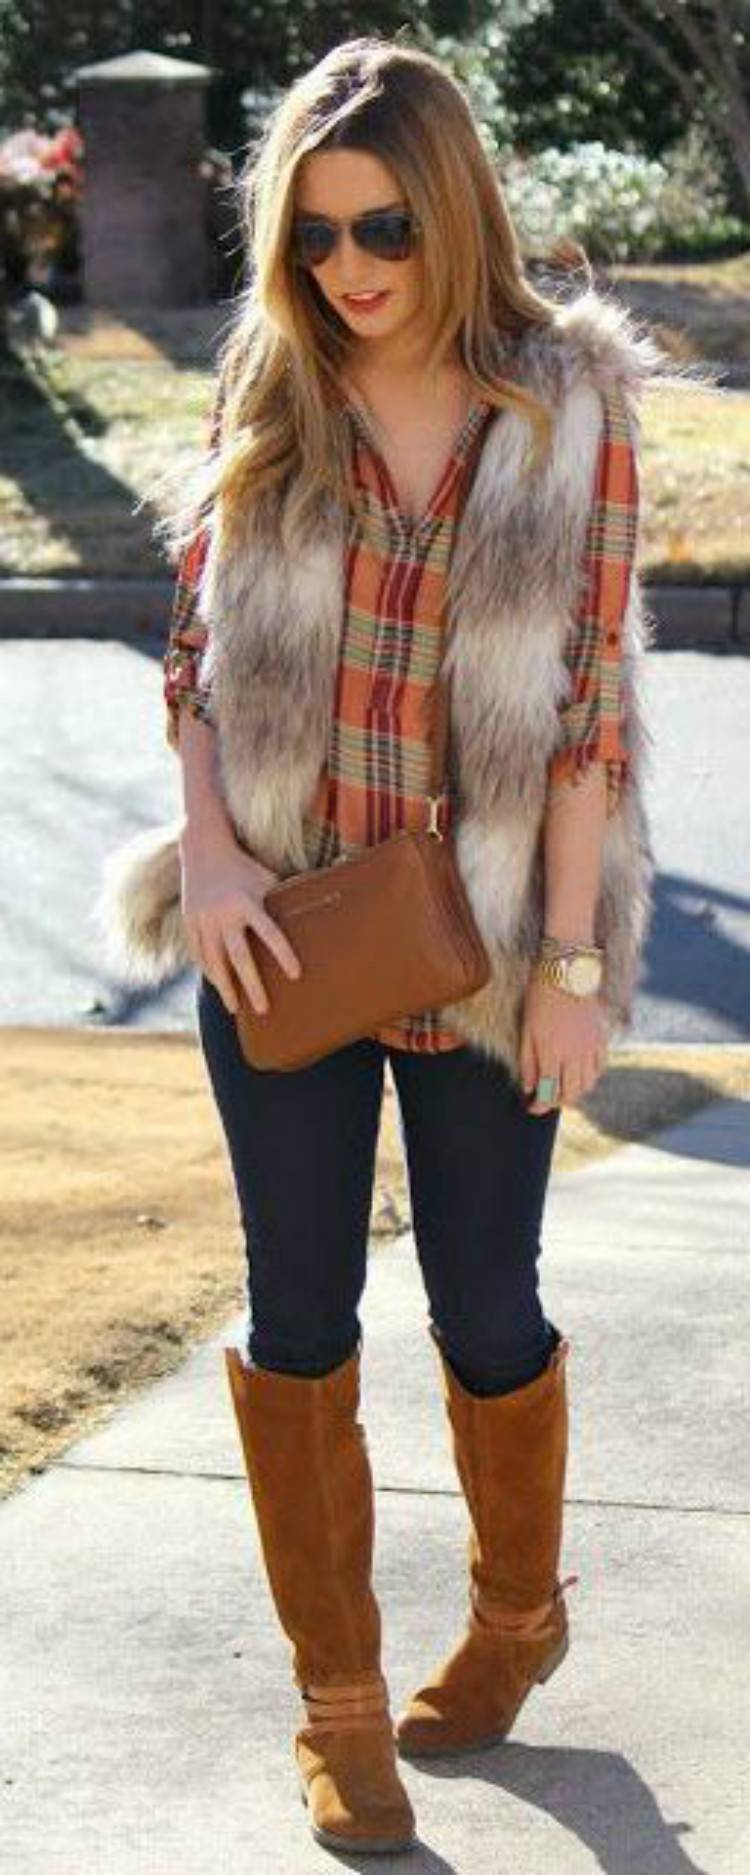 Stunning And Elegant Faux Fur Outfits In Winter; Winter Outfits; Outfits; Winter Coat; Faux Fur Jacket; Faux Fur Coat; Faux Fur Vest; Winter Faux Fur Outfits; Faux Fur Coat With Boots; Faux Fur Vest With Skirt; Winter Skirt; Winter Boots;#winteroutfit #outfits #fauxfurjacket #fauxfurcoat #fauxfurvest #winterboots #winterskirt #fauxfurcoatwithboots